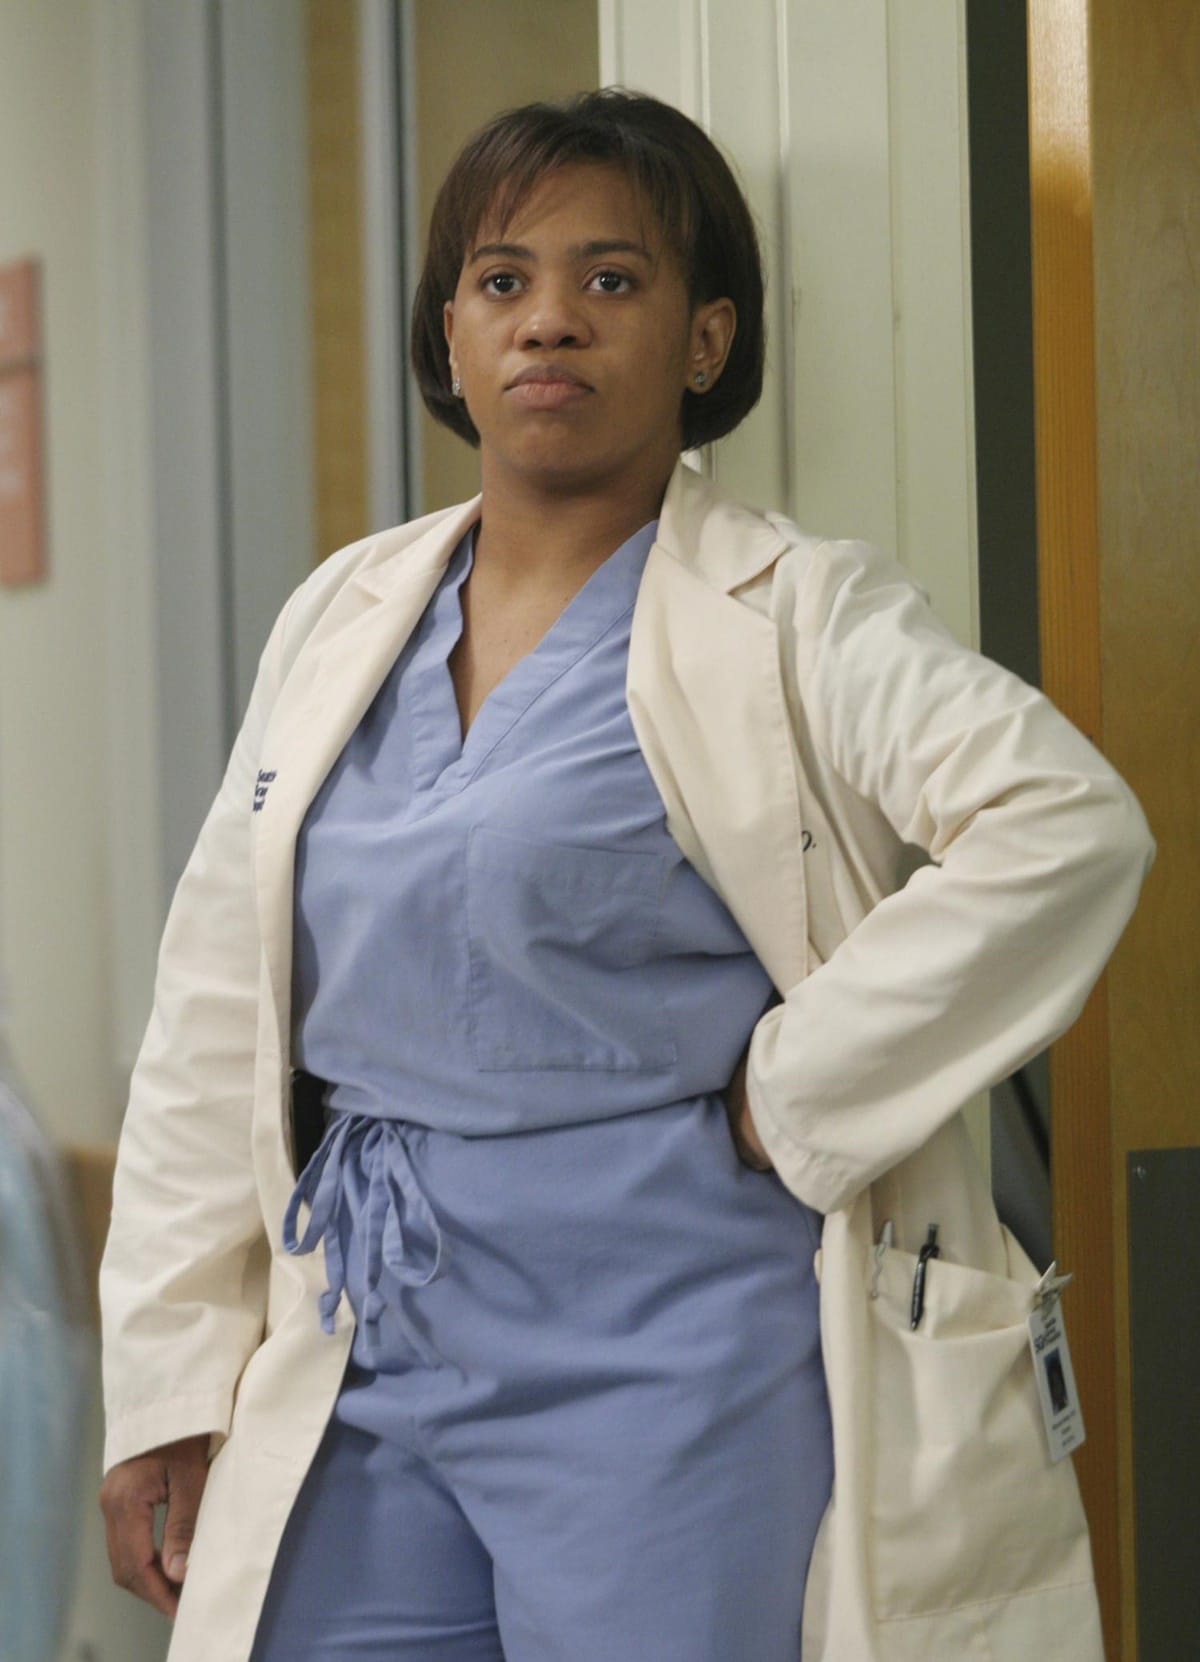 Chandra Danette Wilson has starred as Dr. Miranda Bailey in the popular ABC television drama Grey's Anatomy since 2005, a role which has earned her four Emmy nominations for Best Supporting Actress